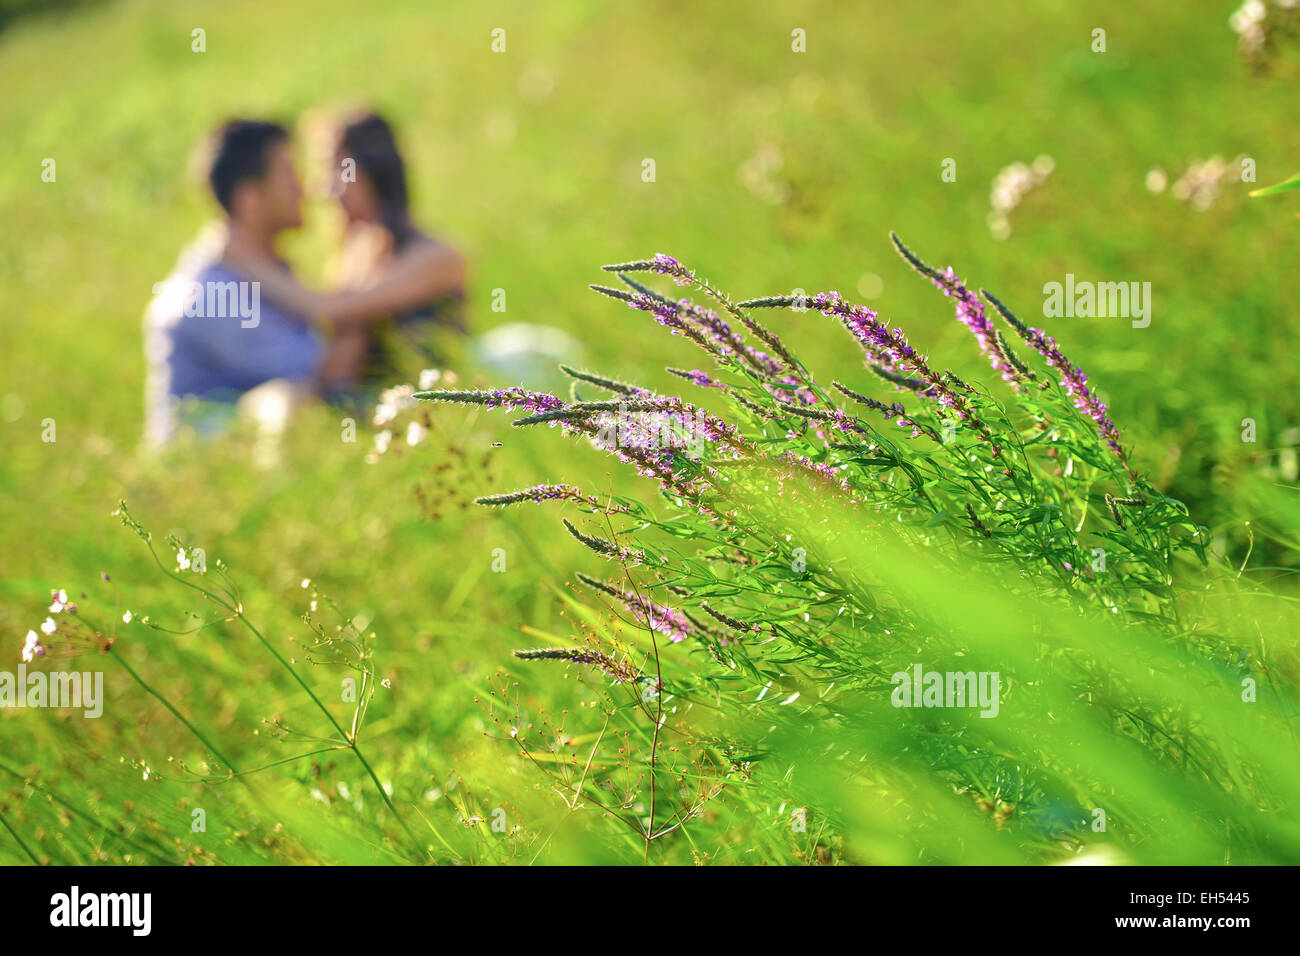 Man and woman kissing blur with focus on flowers Stock Photo